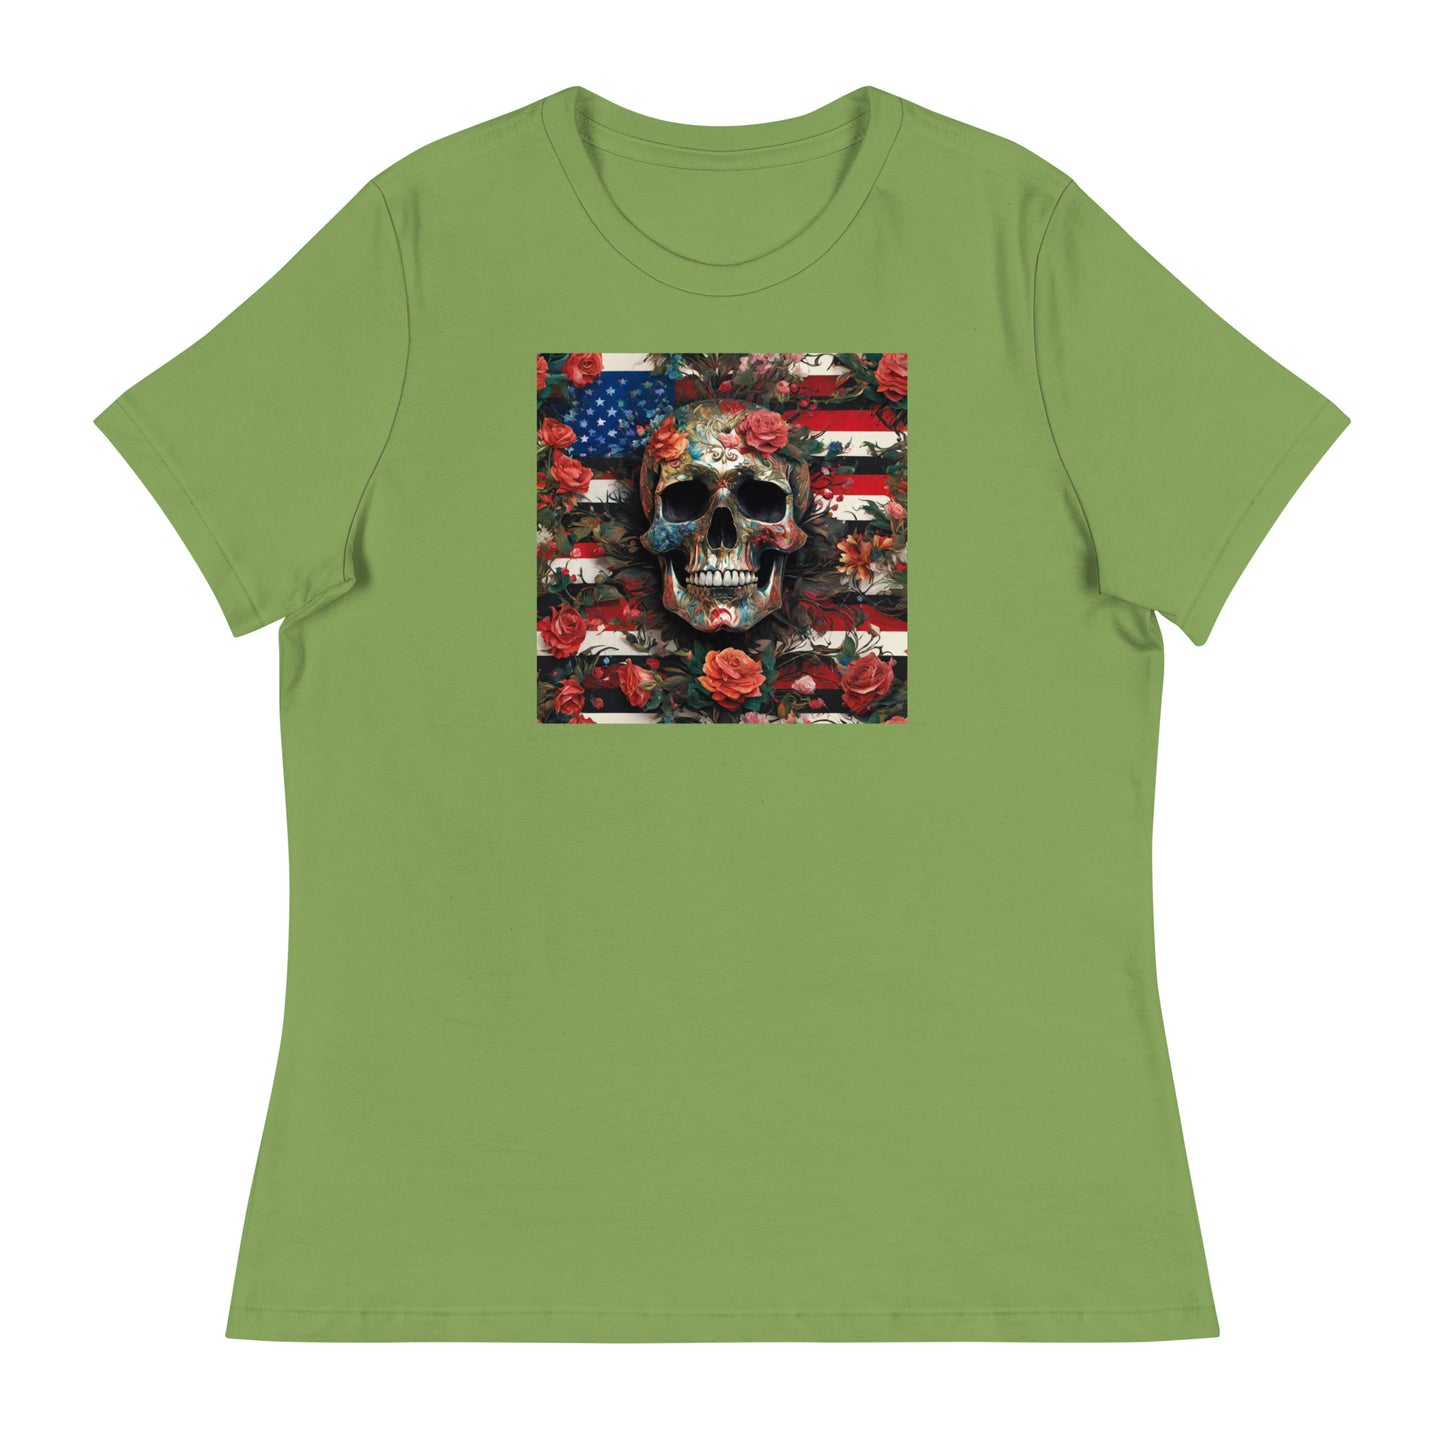 Skull, Roses, and Flag Women's Graphic T-Shirt Leaf